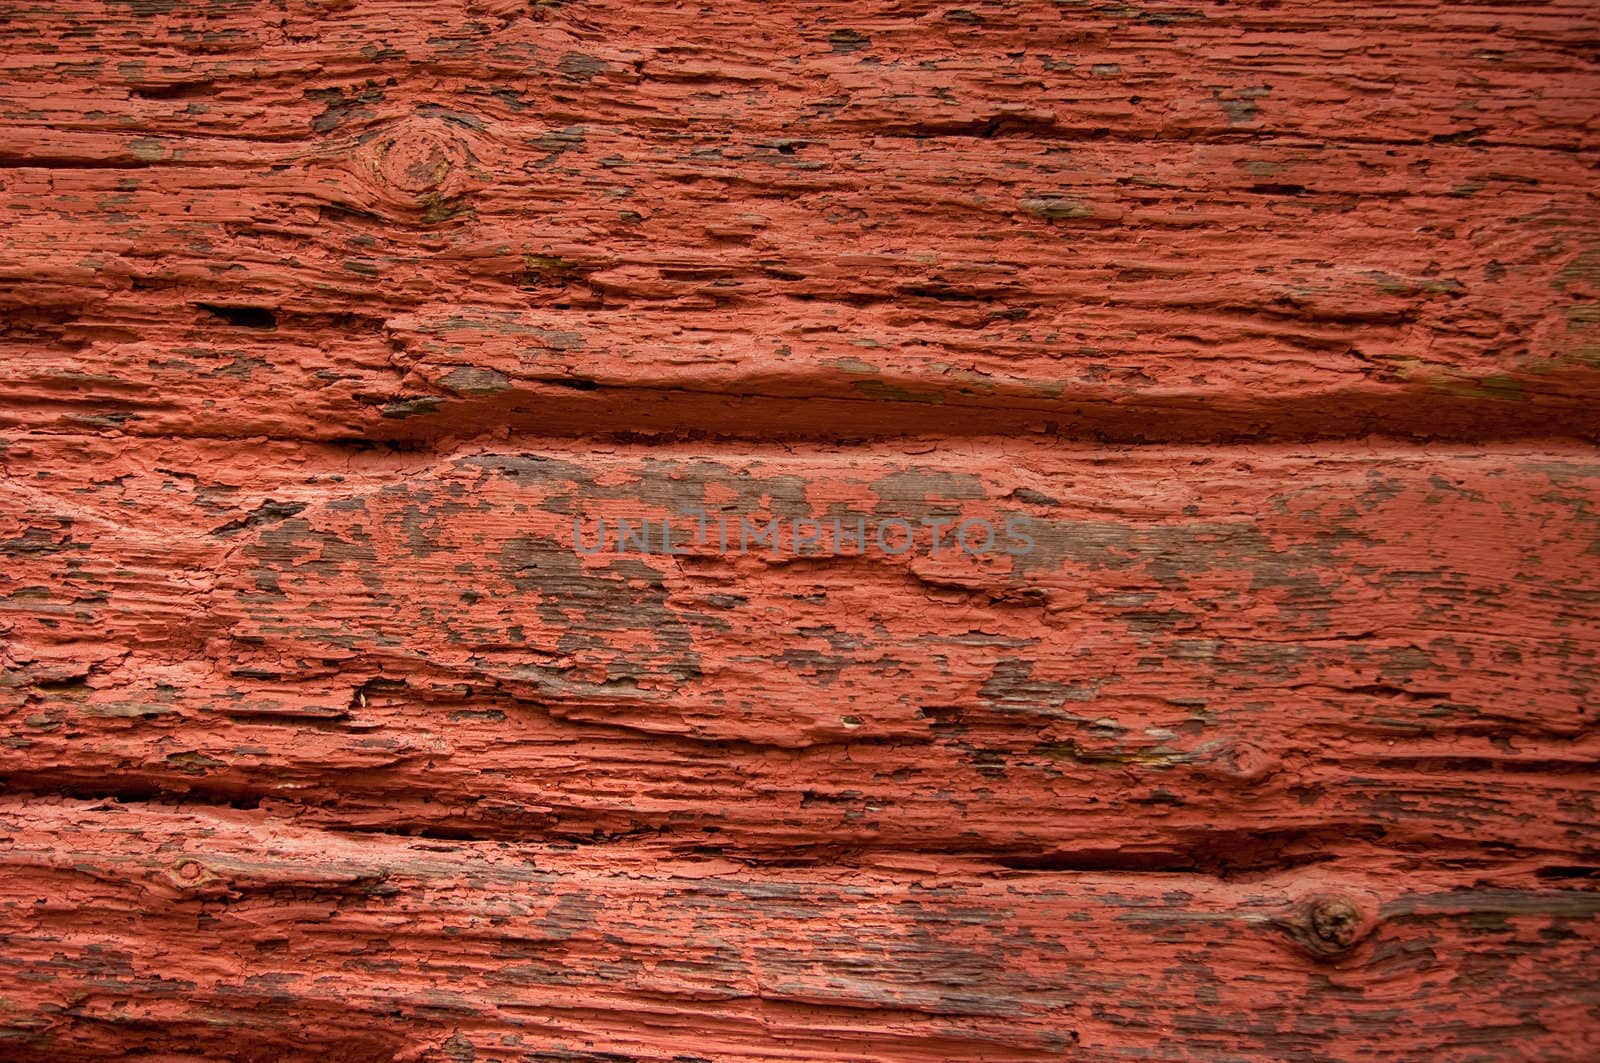 Old red paint falling of a wooden wall.